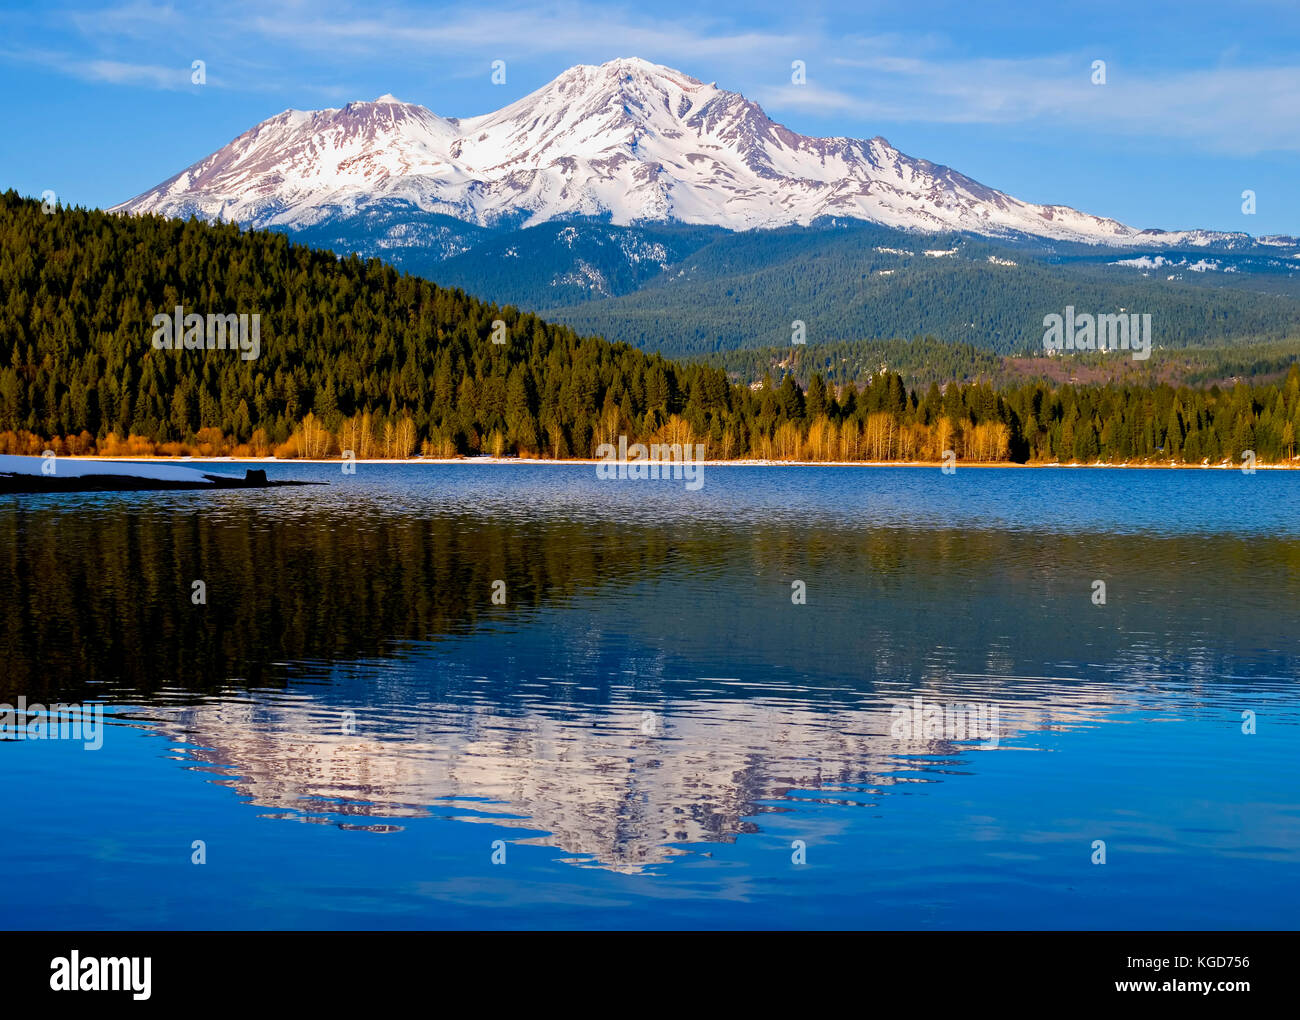 Mount Shasta in winter with lake on foreground Stock Photo